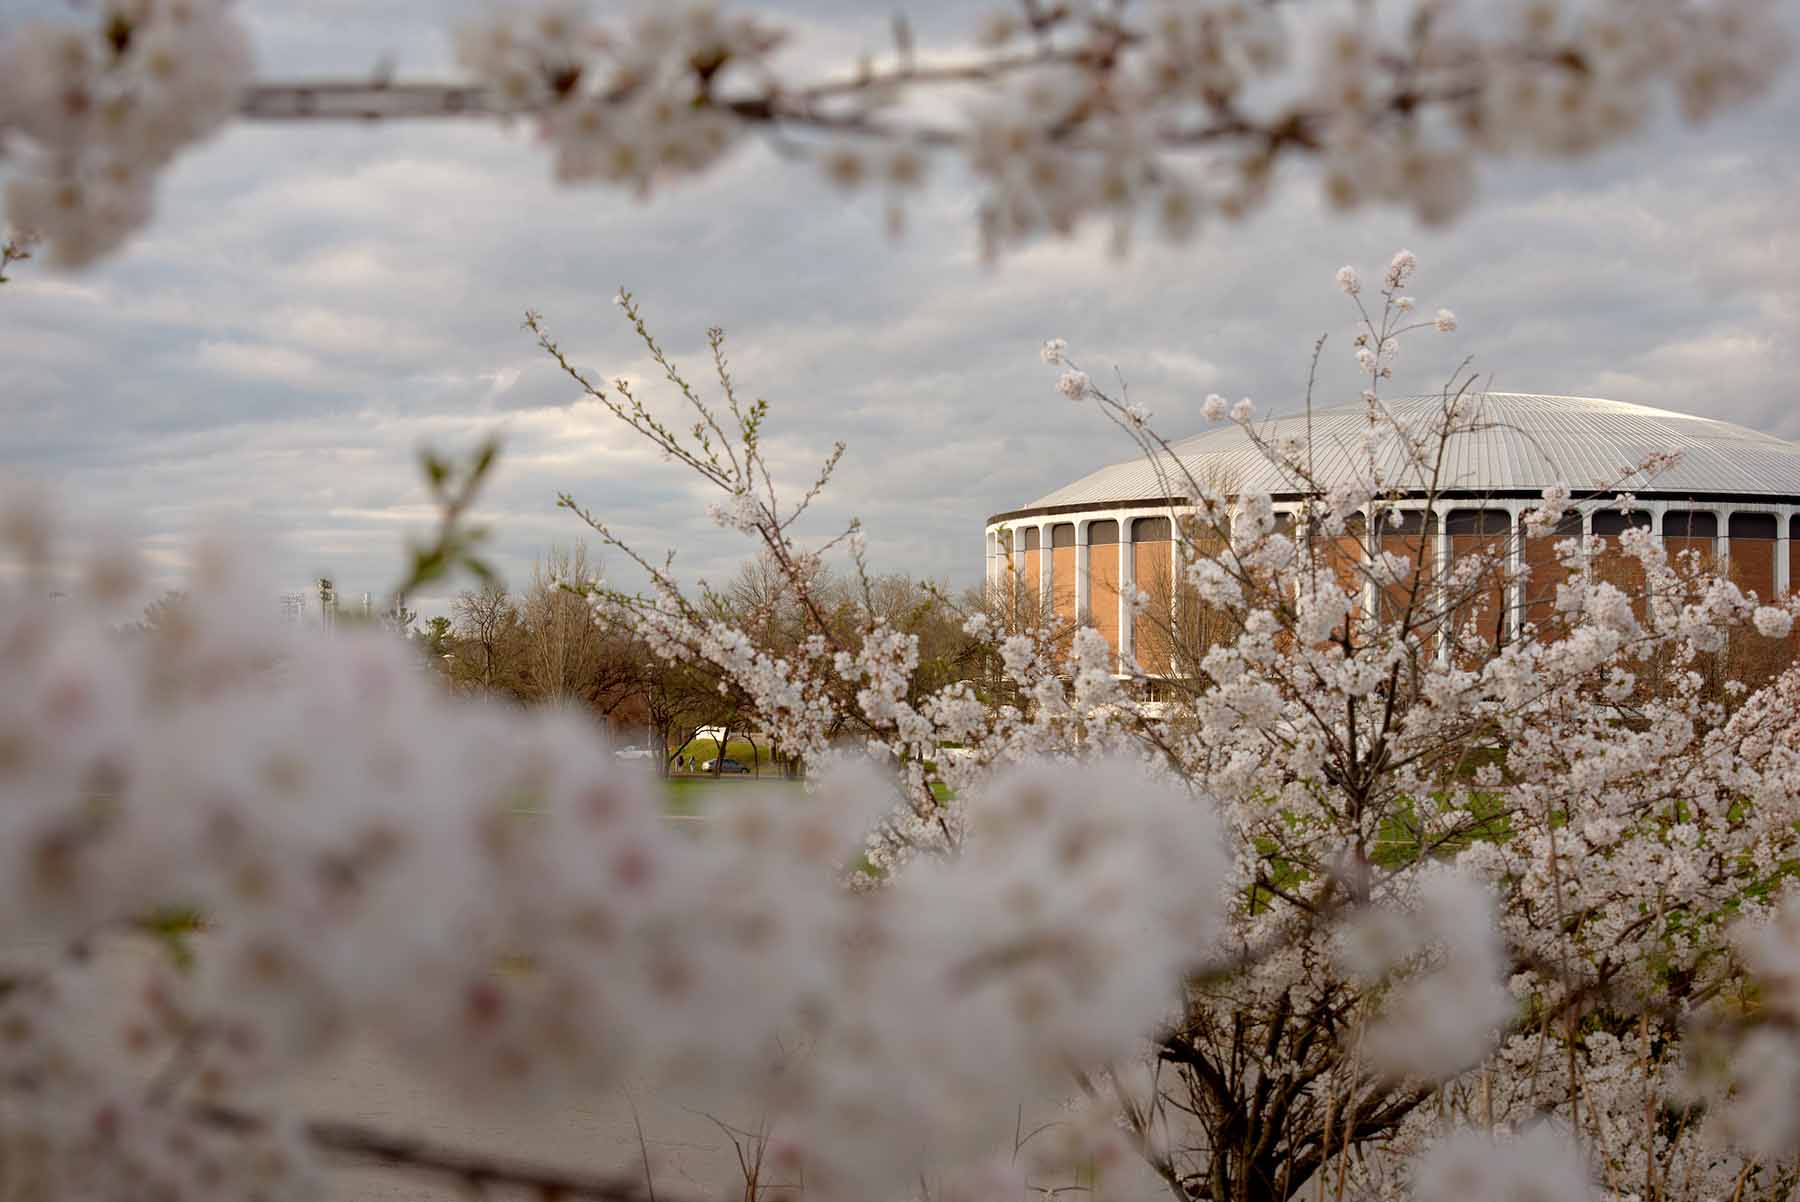 The Convocation Center at Ohio University as viewed through flowering cherry blossoms